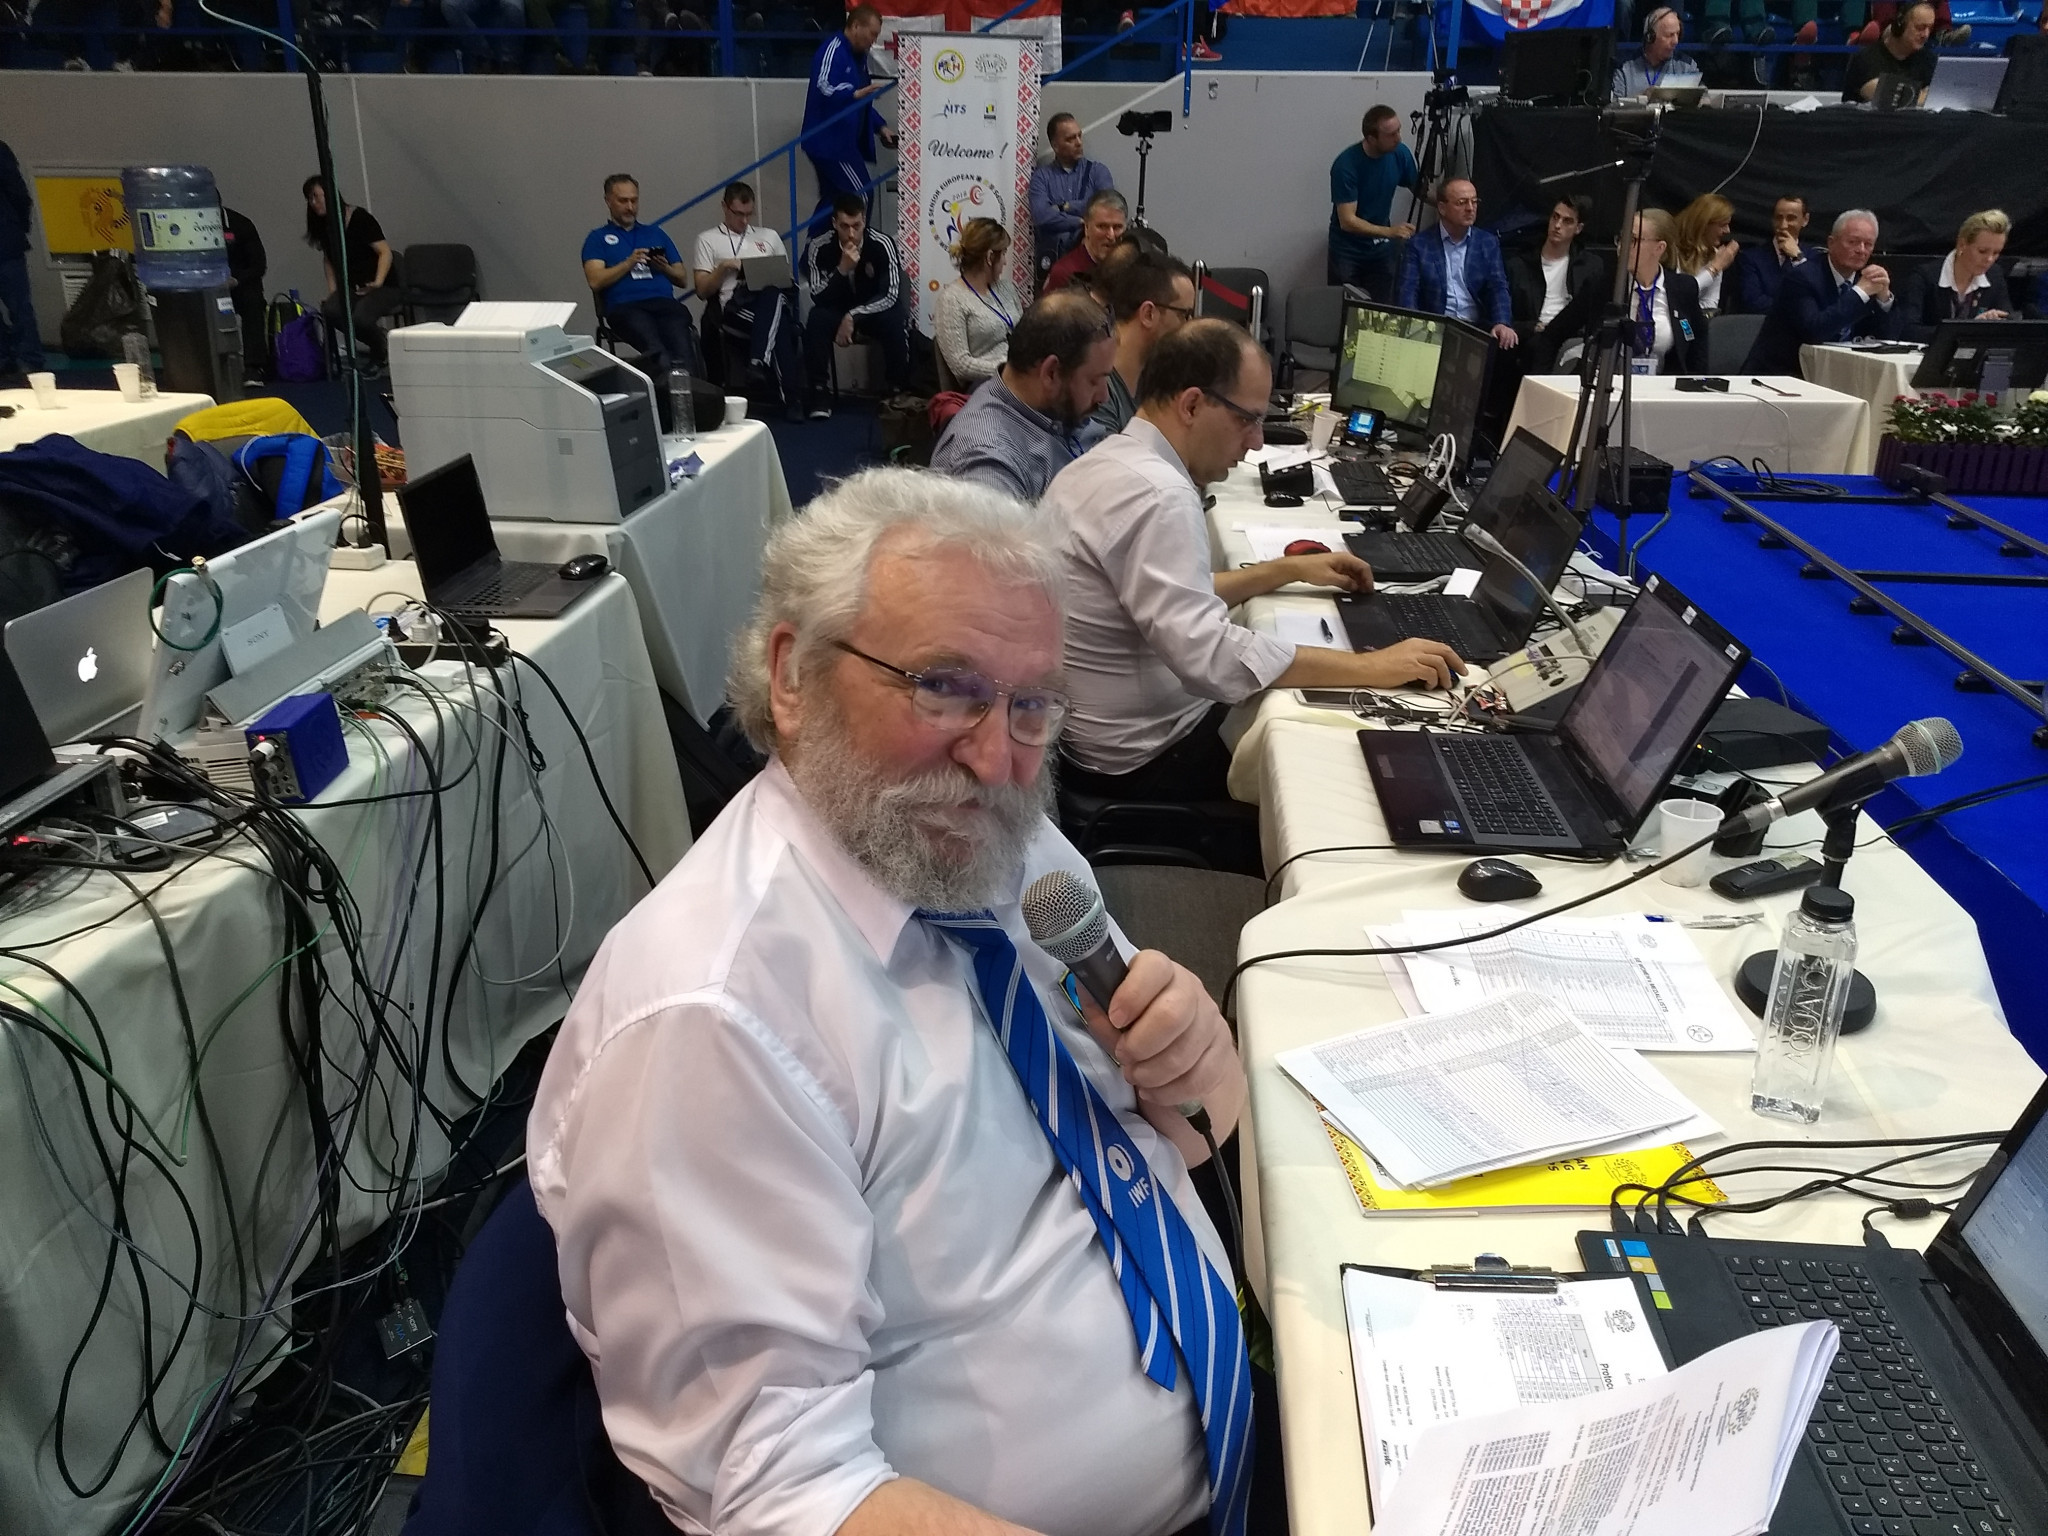 The European Championships were the 1,001st event that Polish commentator and official Bogdan Mokranowski had been involved in during his career ©Brian Oliver/ITG